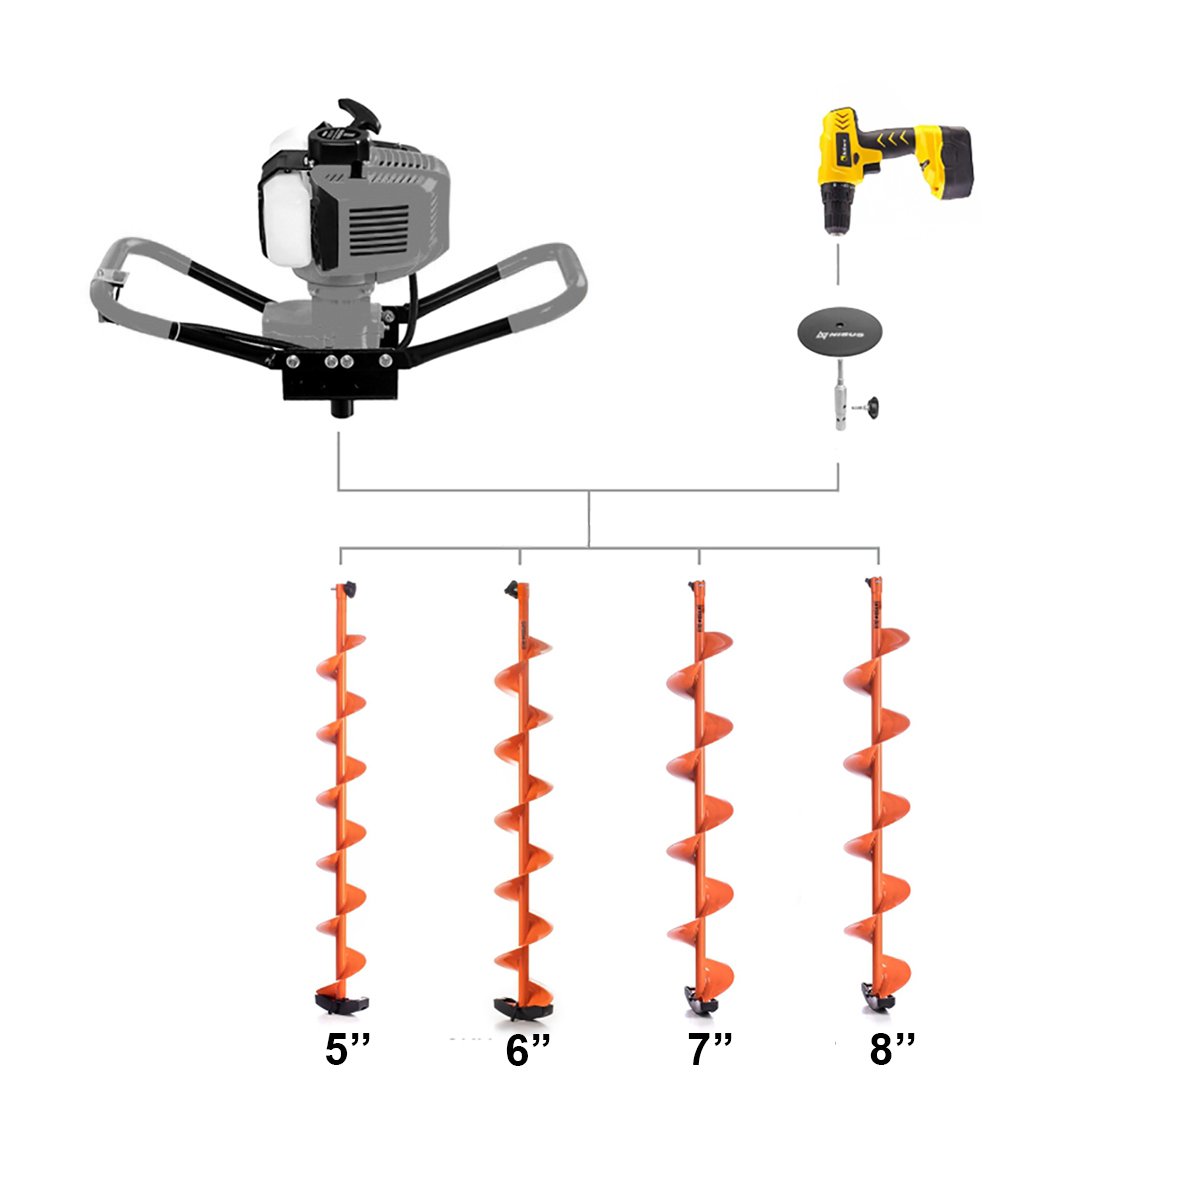 Professional Ice Fishing Auger Drill Bit with Cordless Drill Adapter